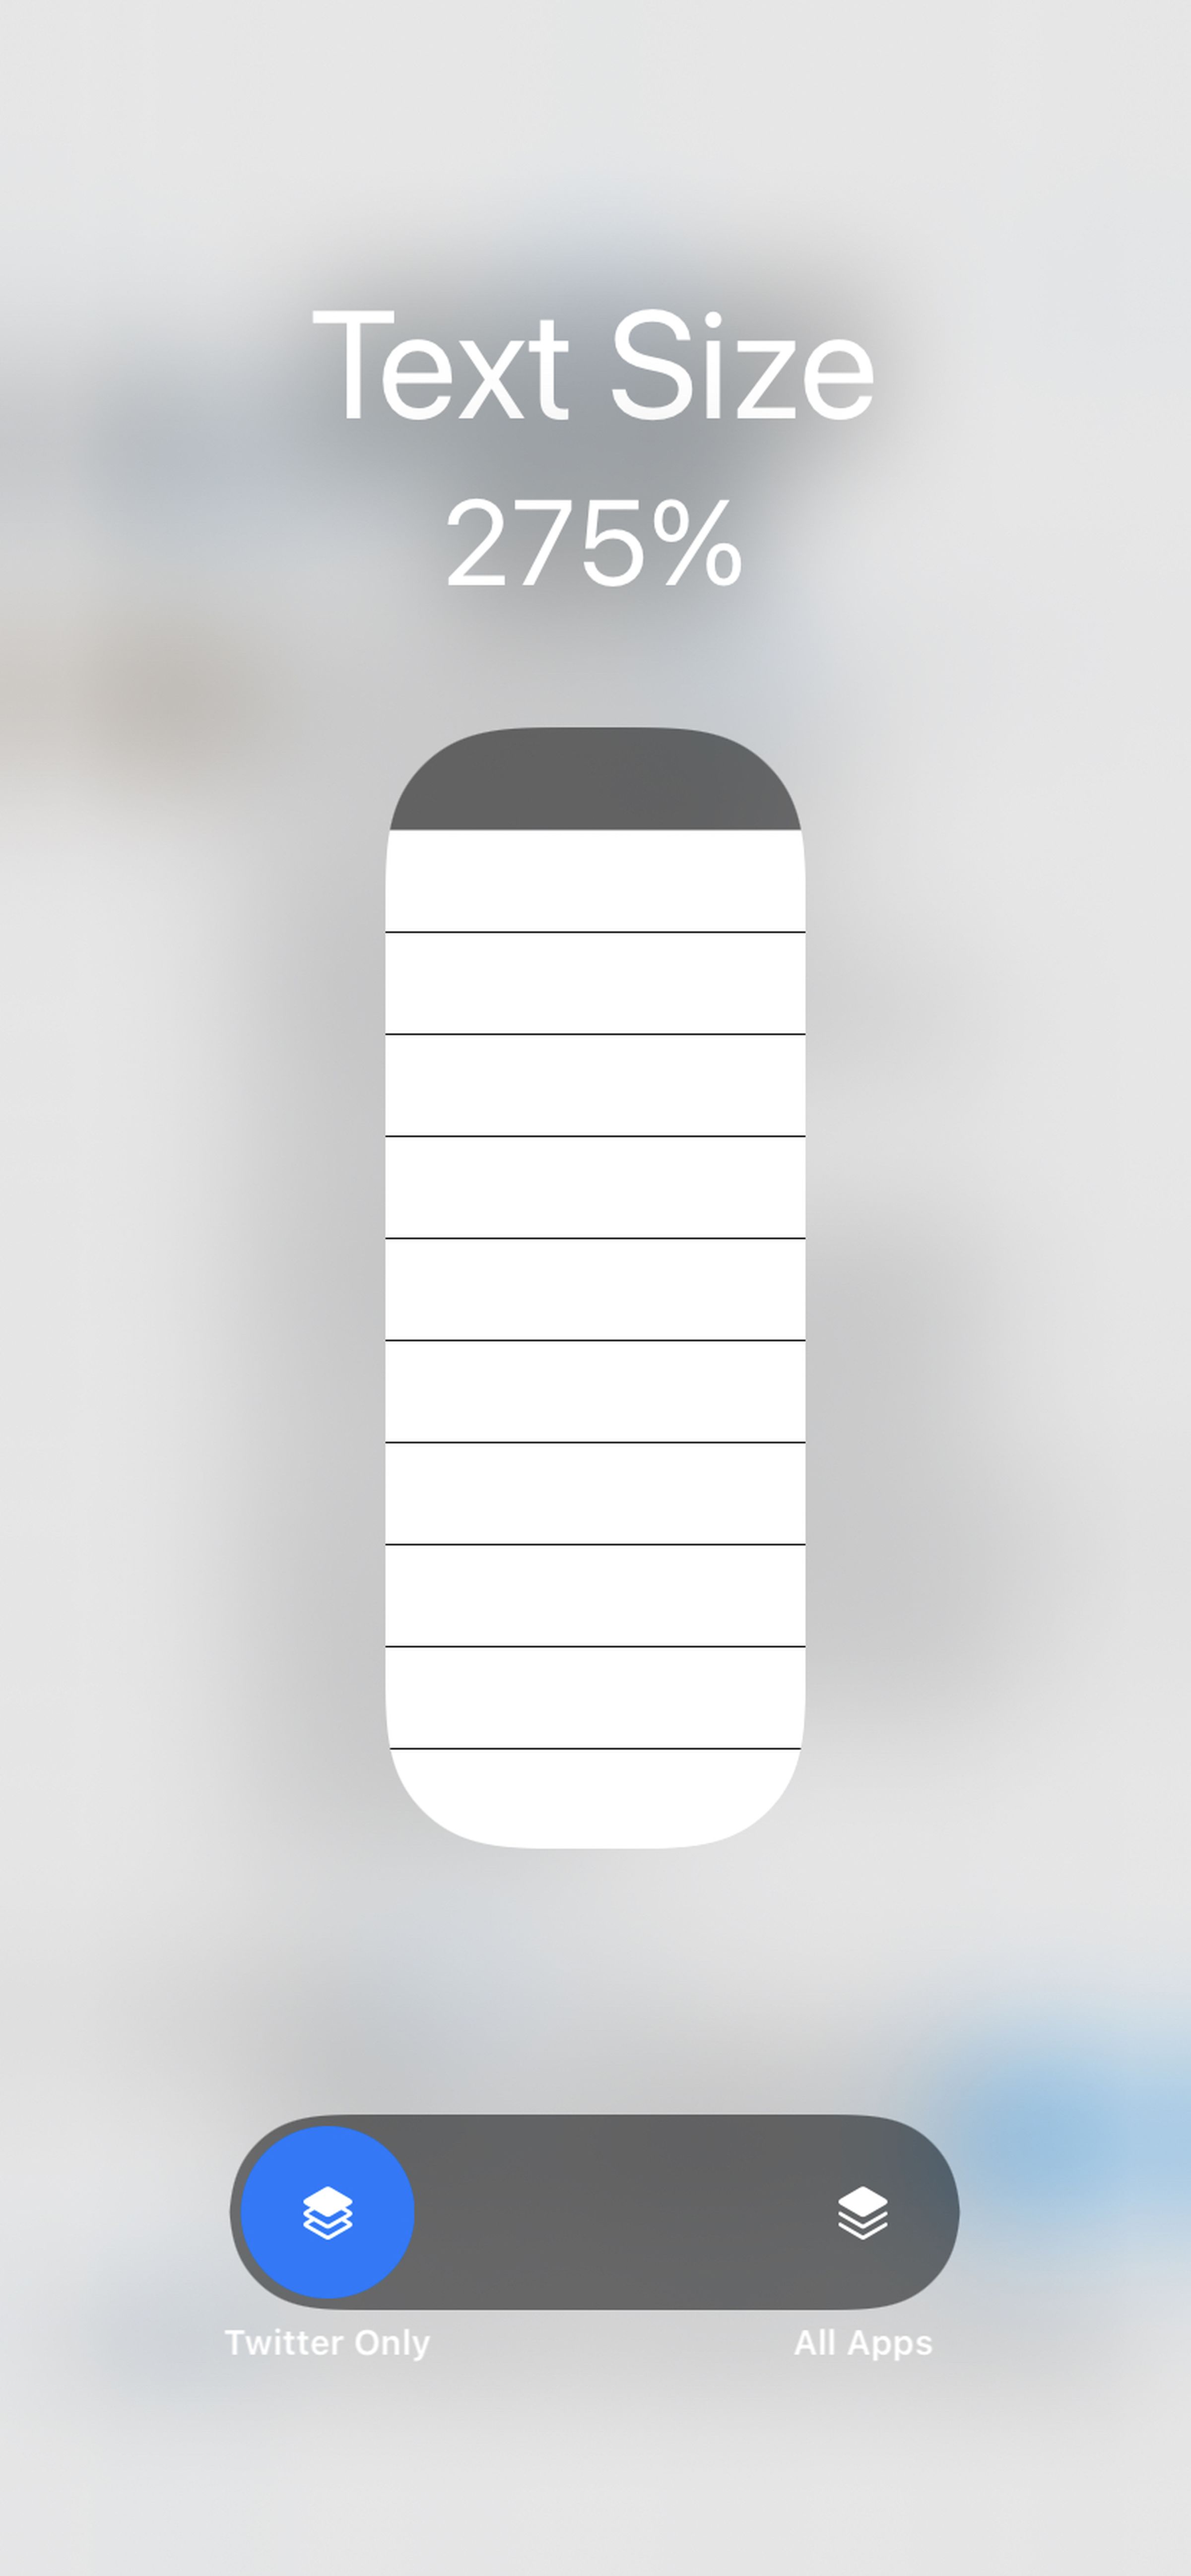 The toggle at the bottom lets you switch text size for a single app.